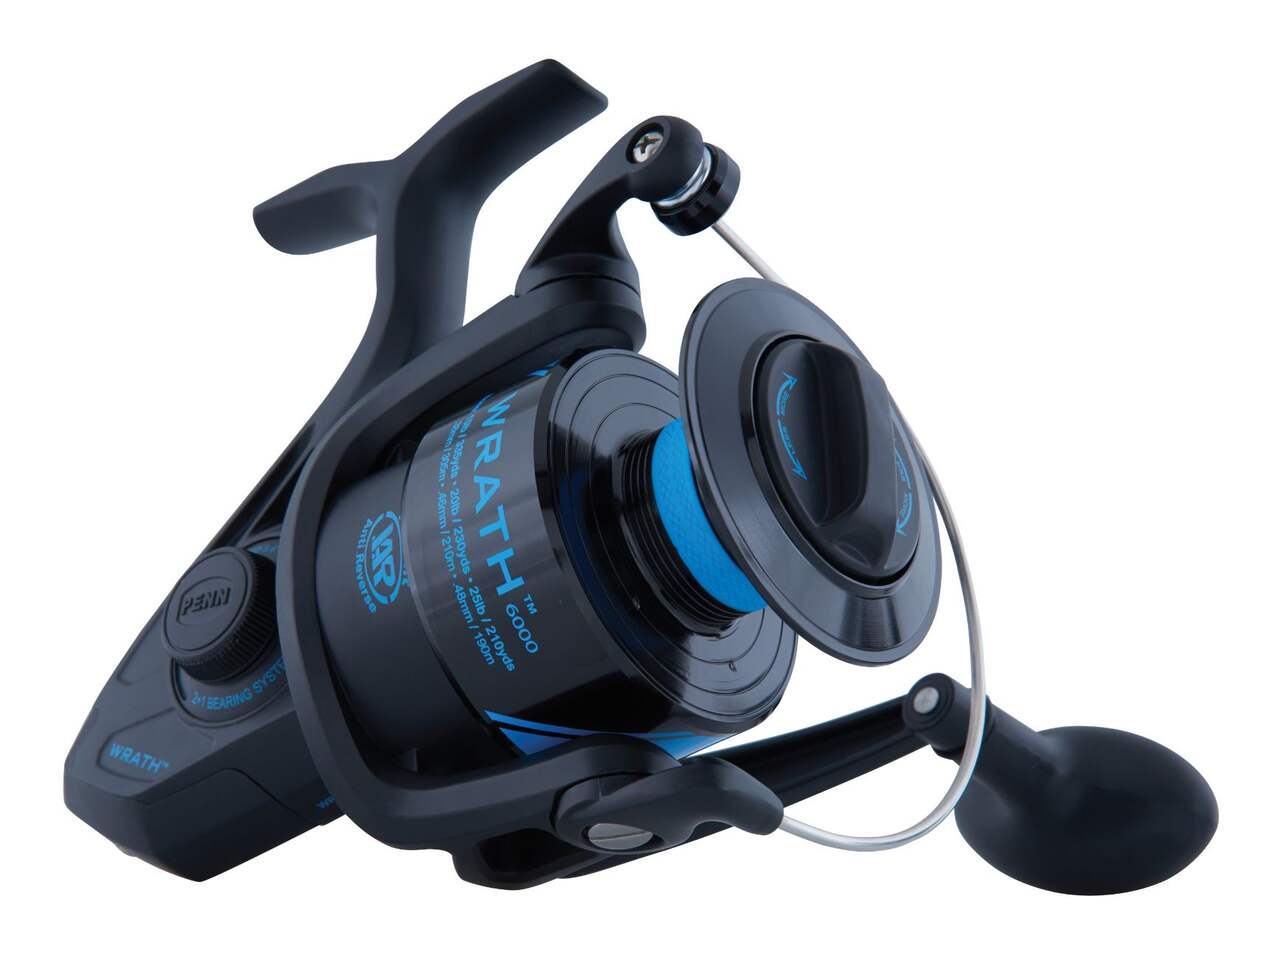 https://media-www.canadiantire.ca/product/playing/fishing/fishing-equipment/0771758/penn-wrath-spinning-reel-6000-7e182925-91da-4213-a3dc-7682d6a20f66-jpgrendition.jpg?imdensity=1&imwidth=640&impolicy=mZoom